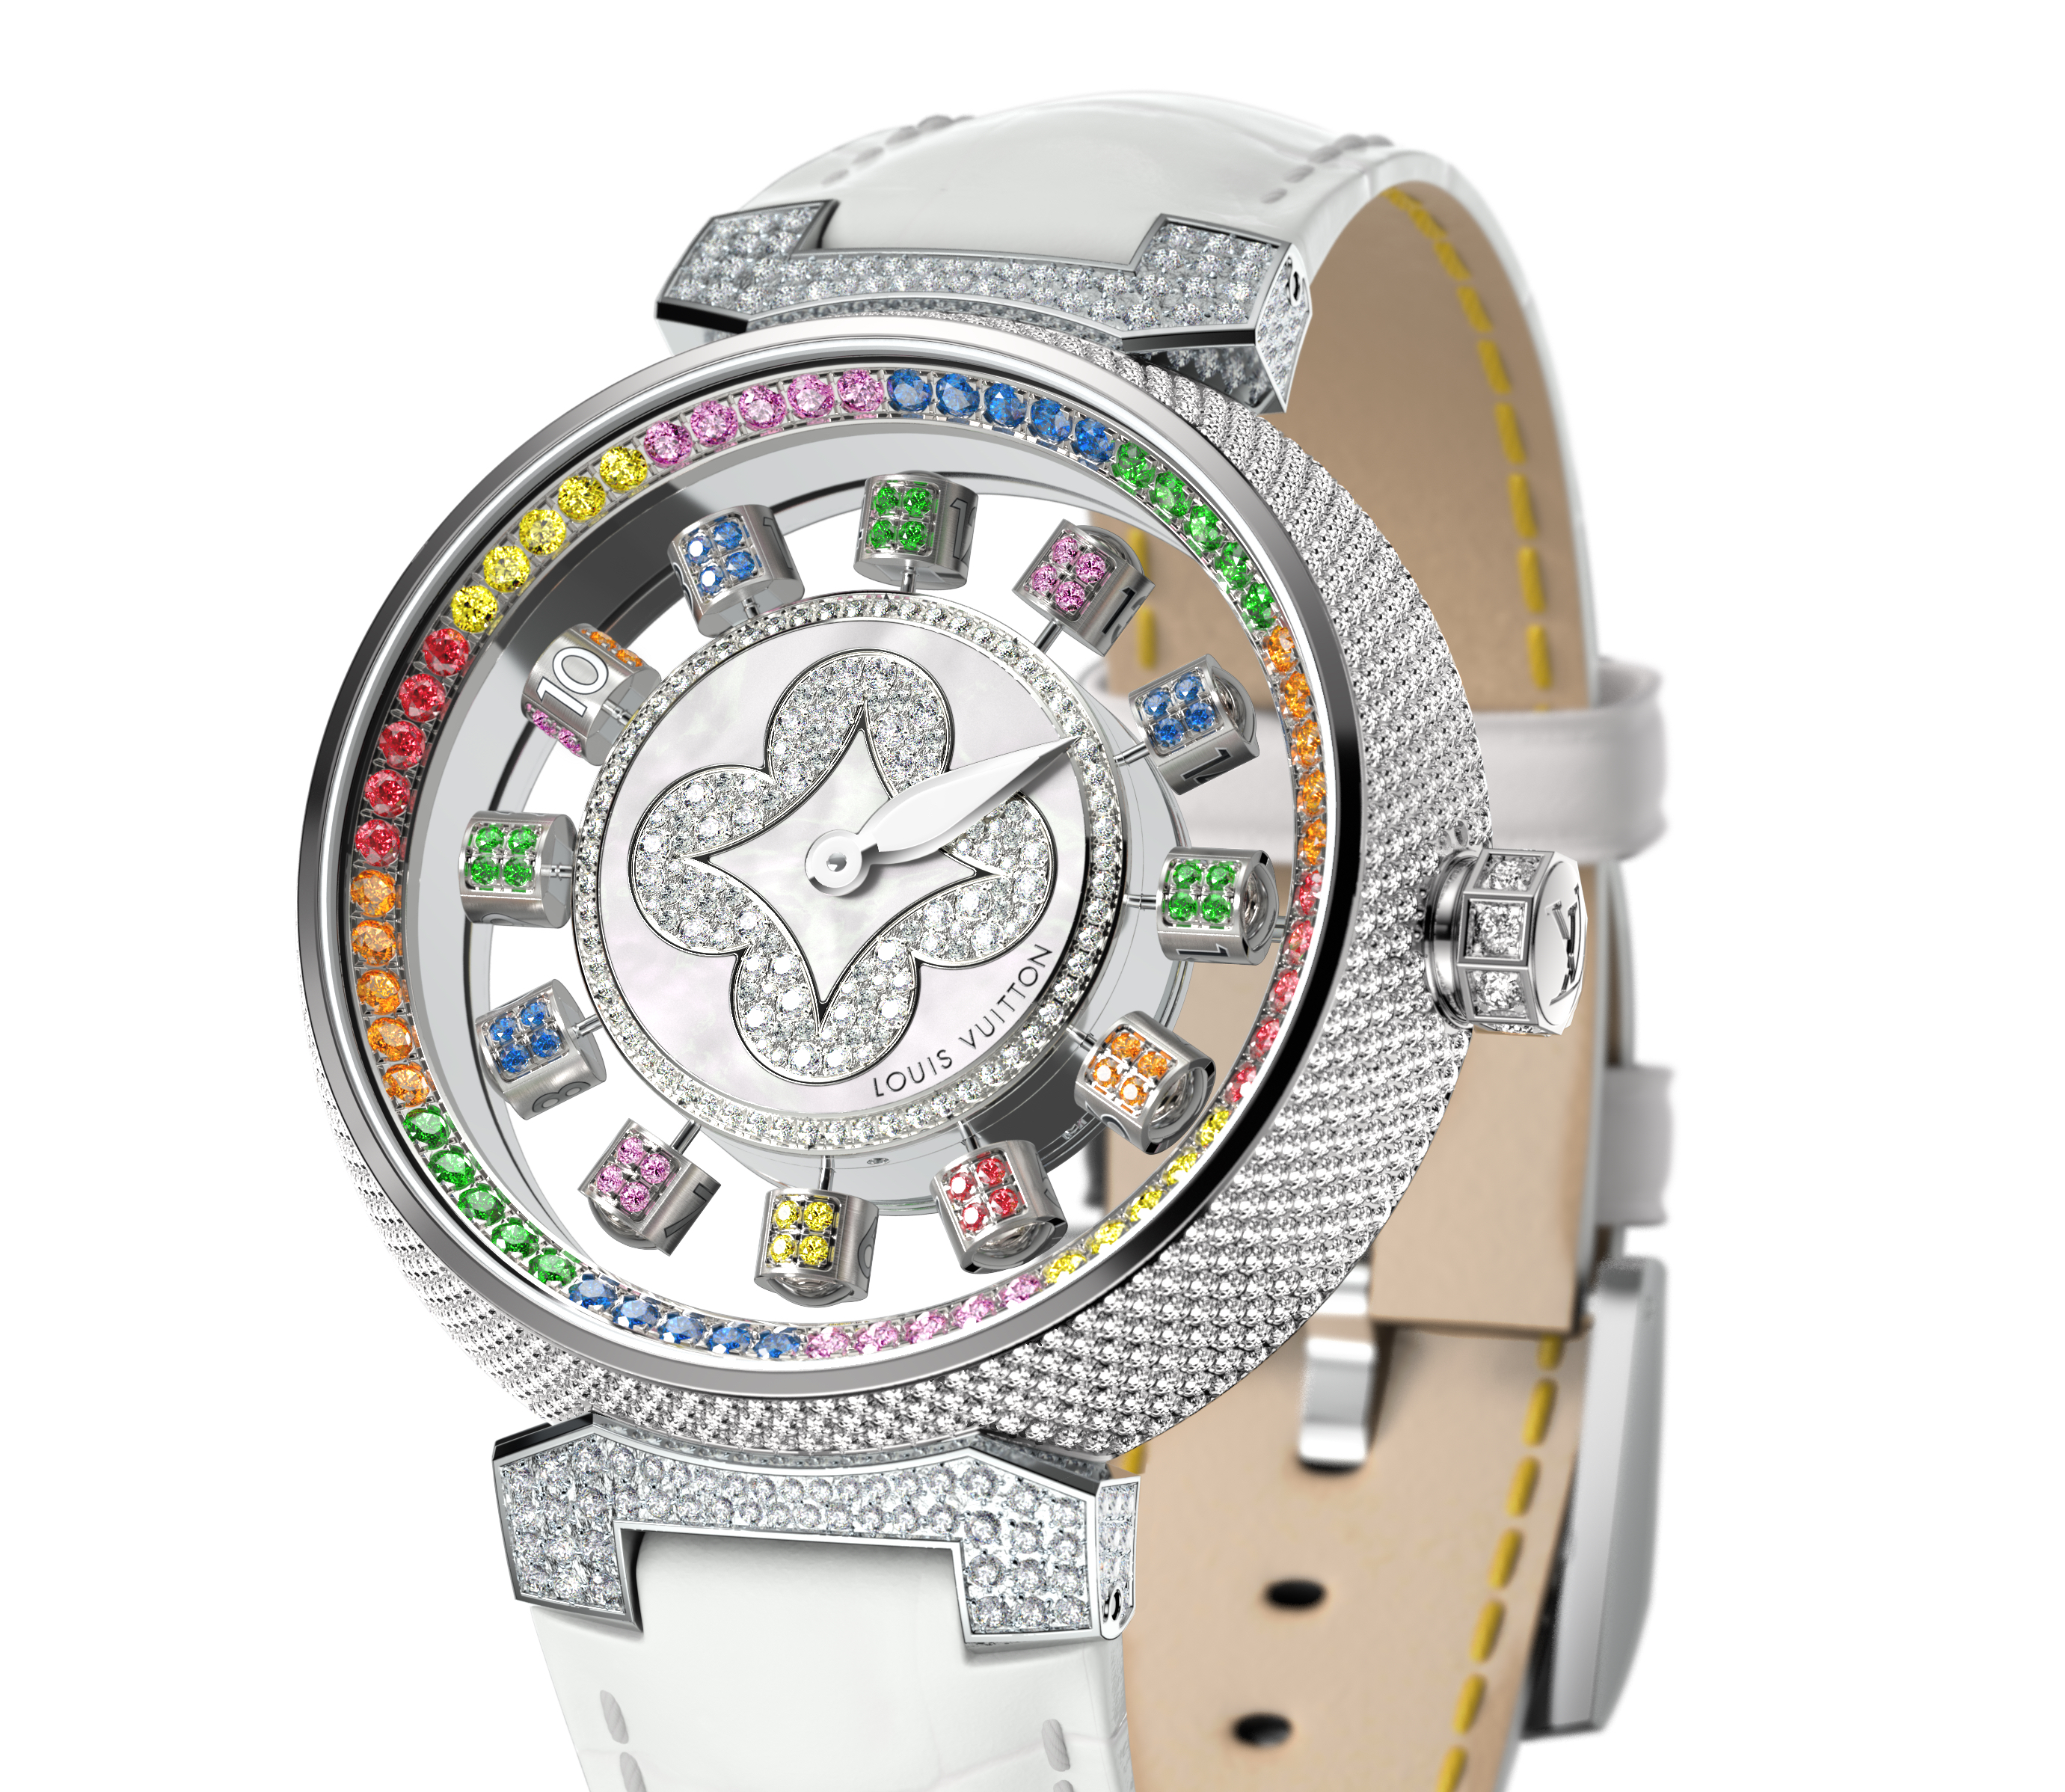 Louis Vuitton Tambour Spin Time collection: Fun and stylish